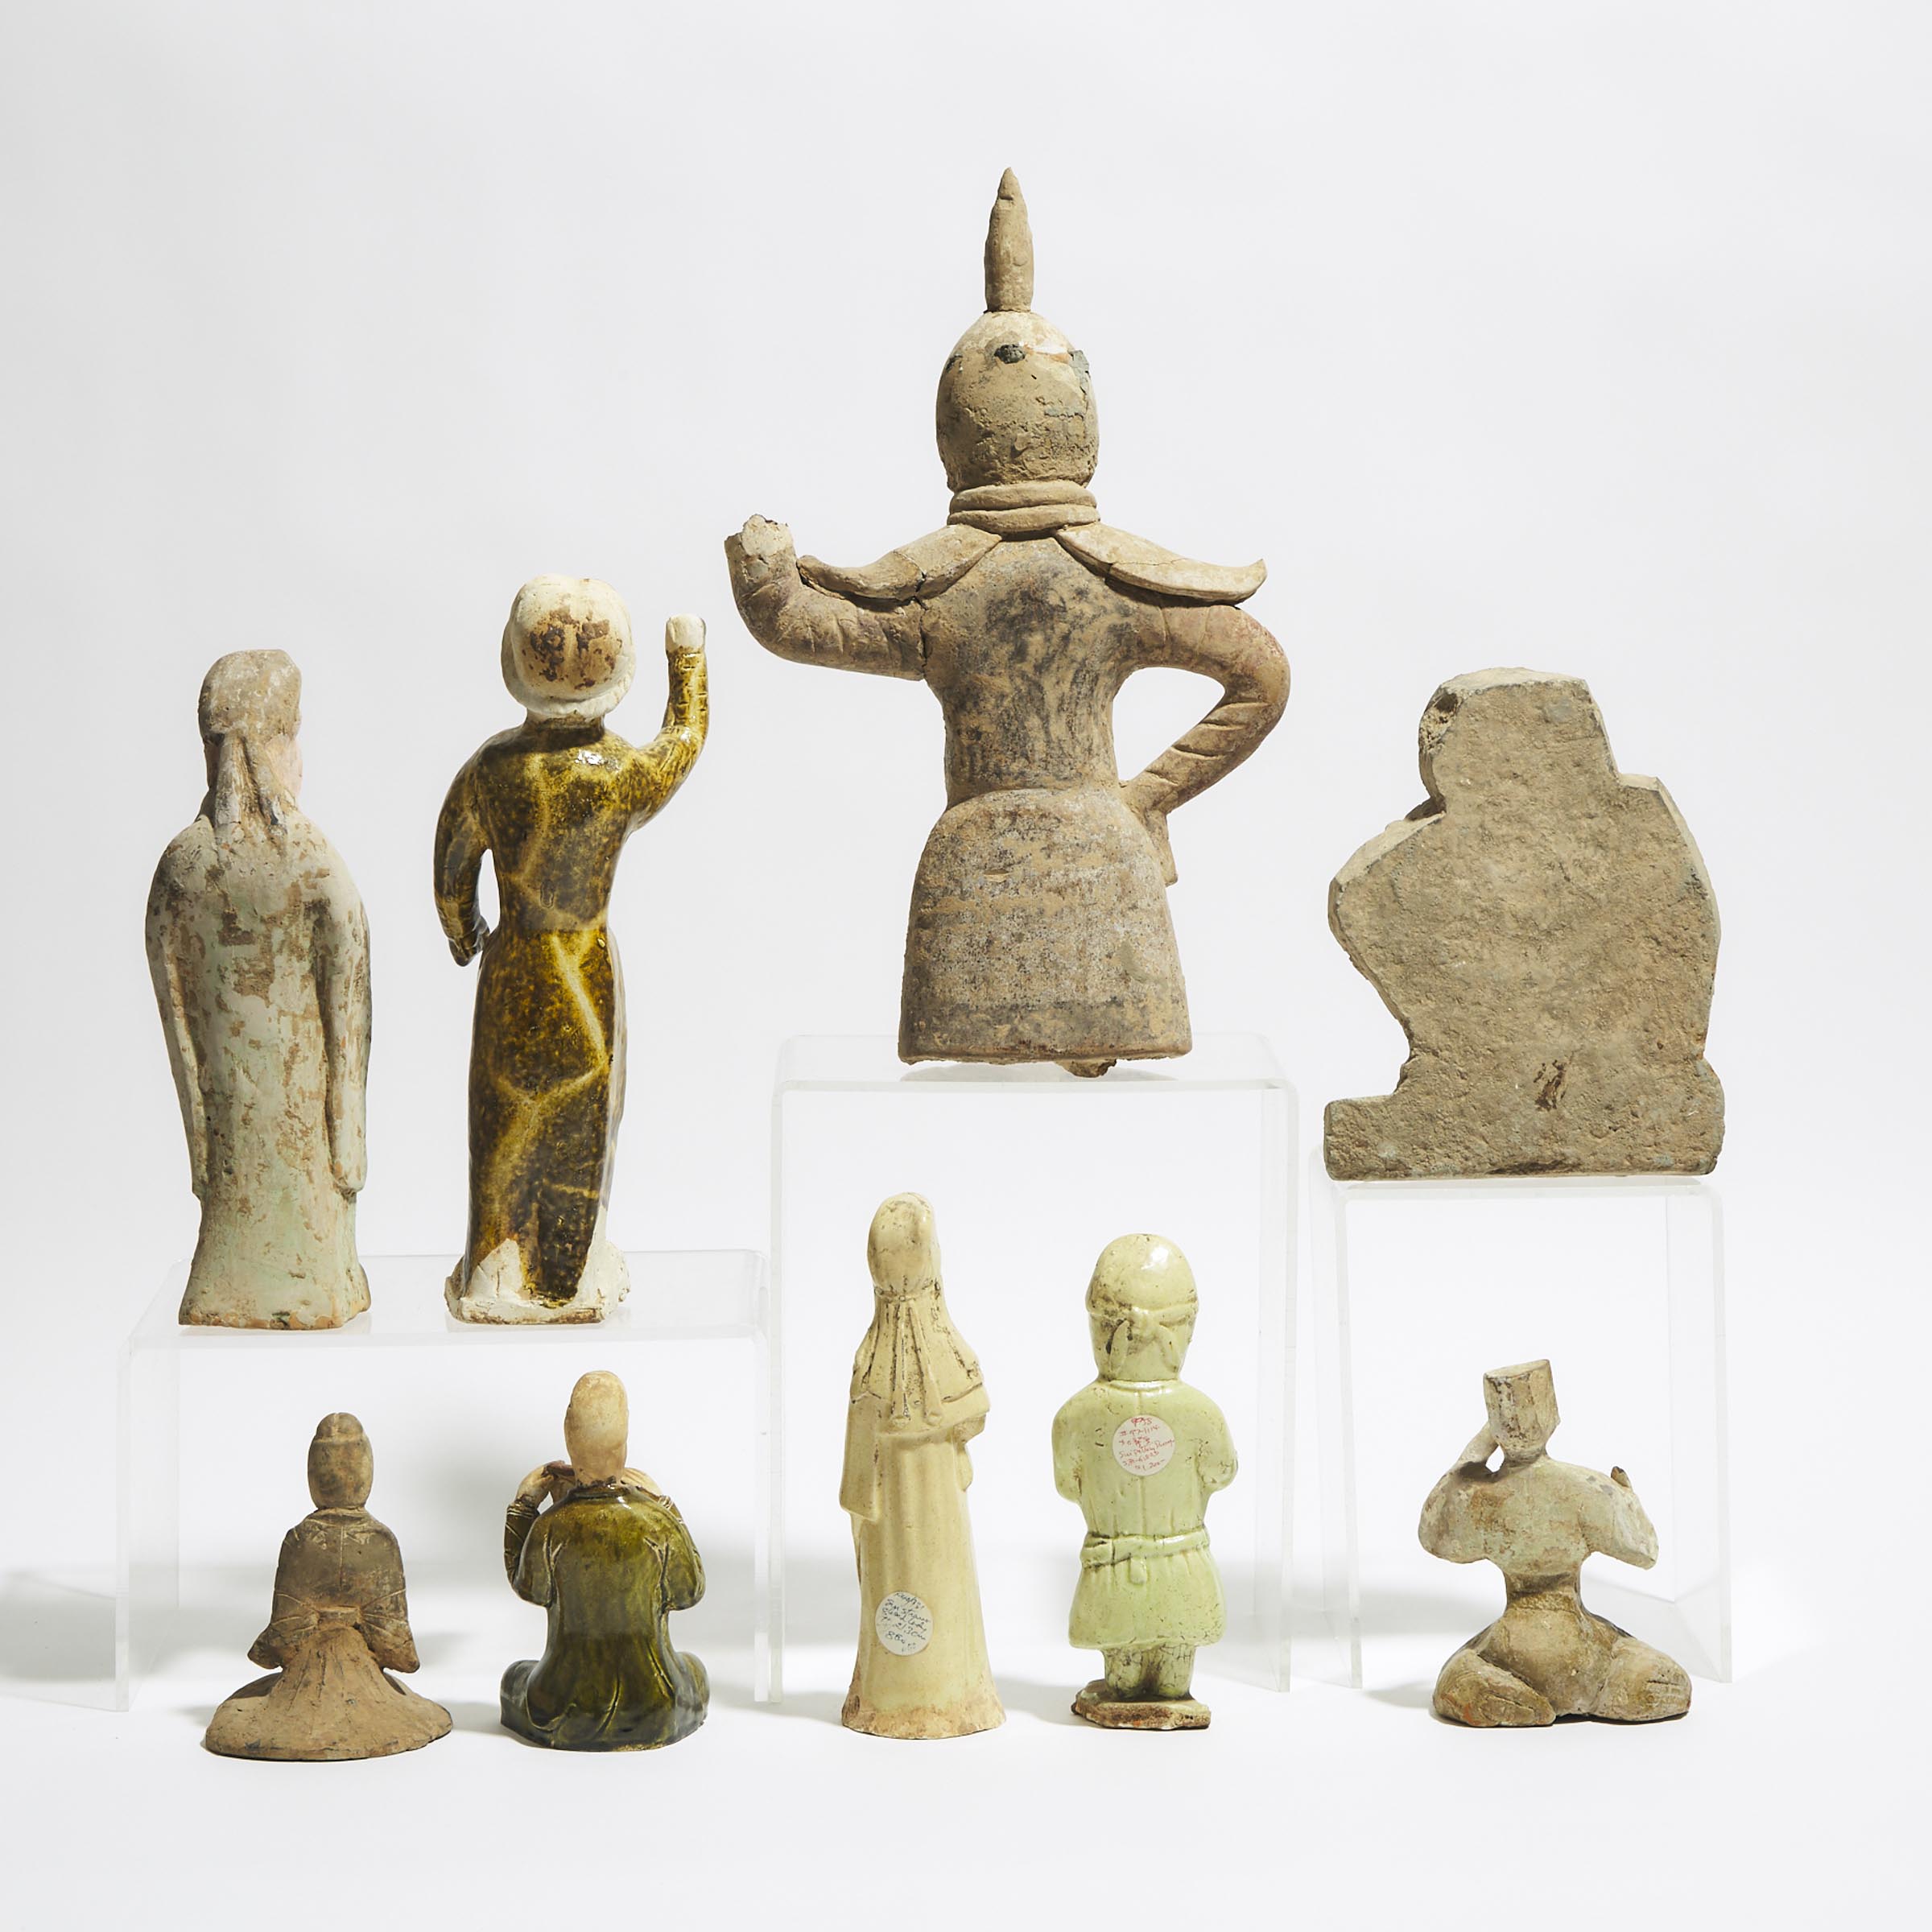 A Group of Nine Pottery Tomb Figures, Han/Tang Dynasty